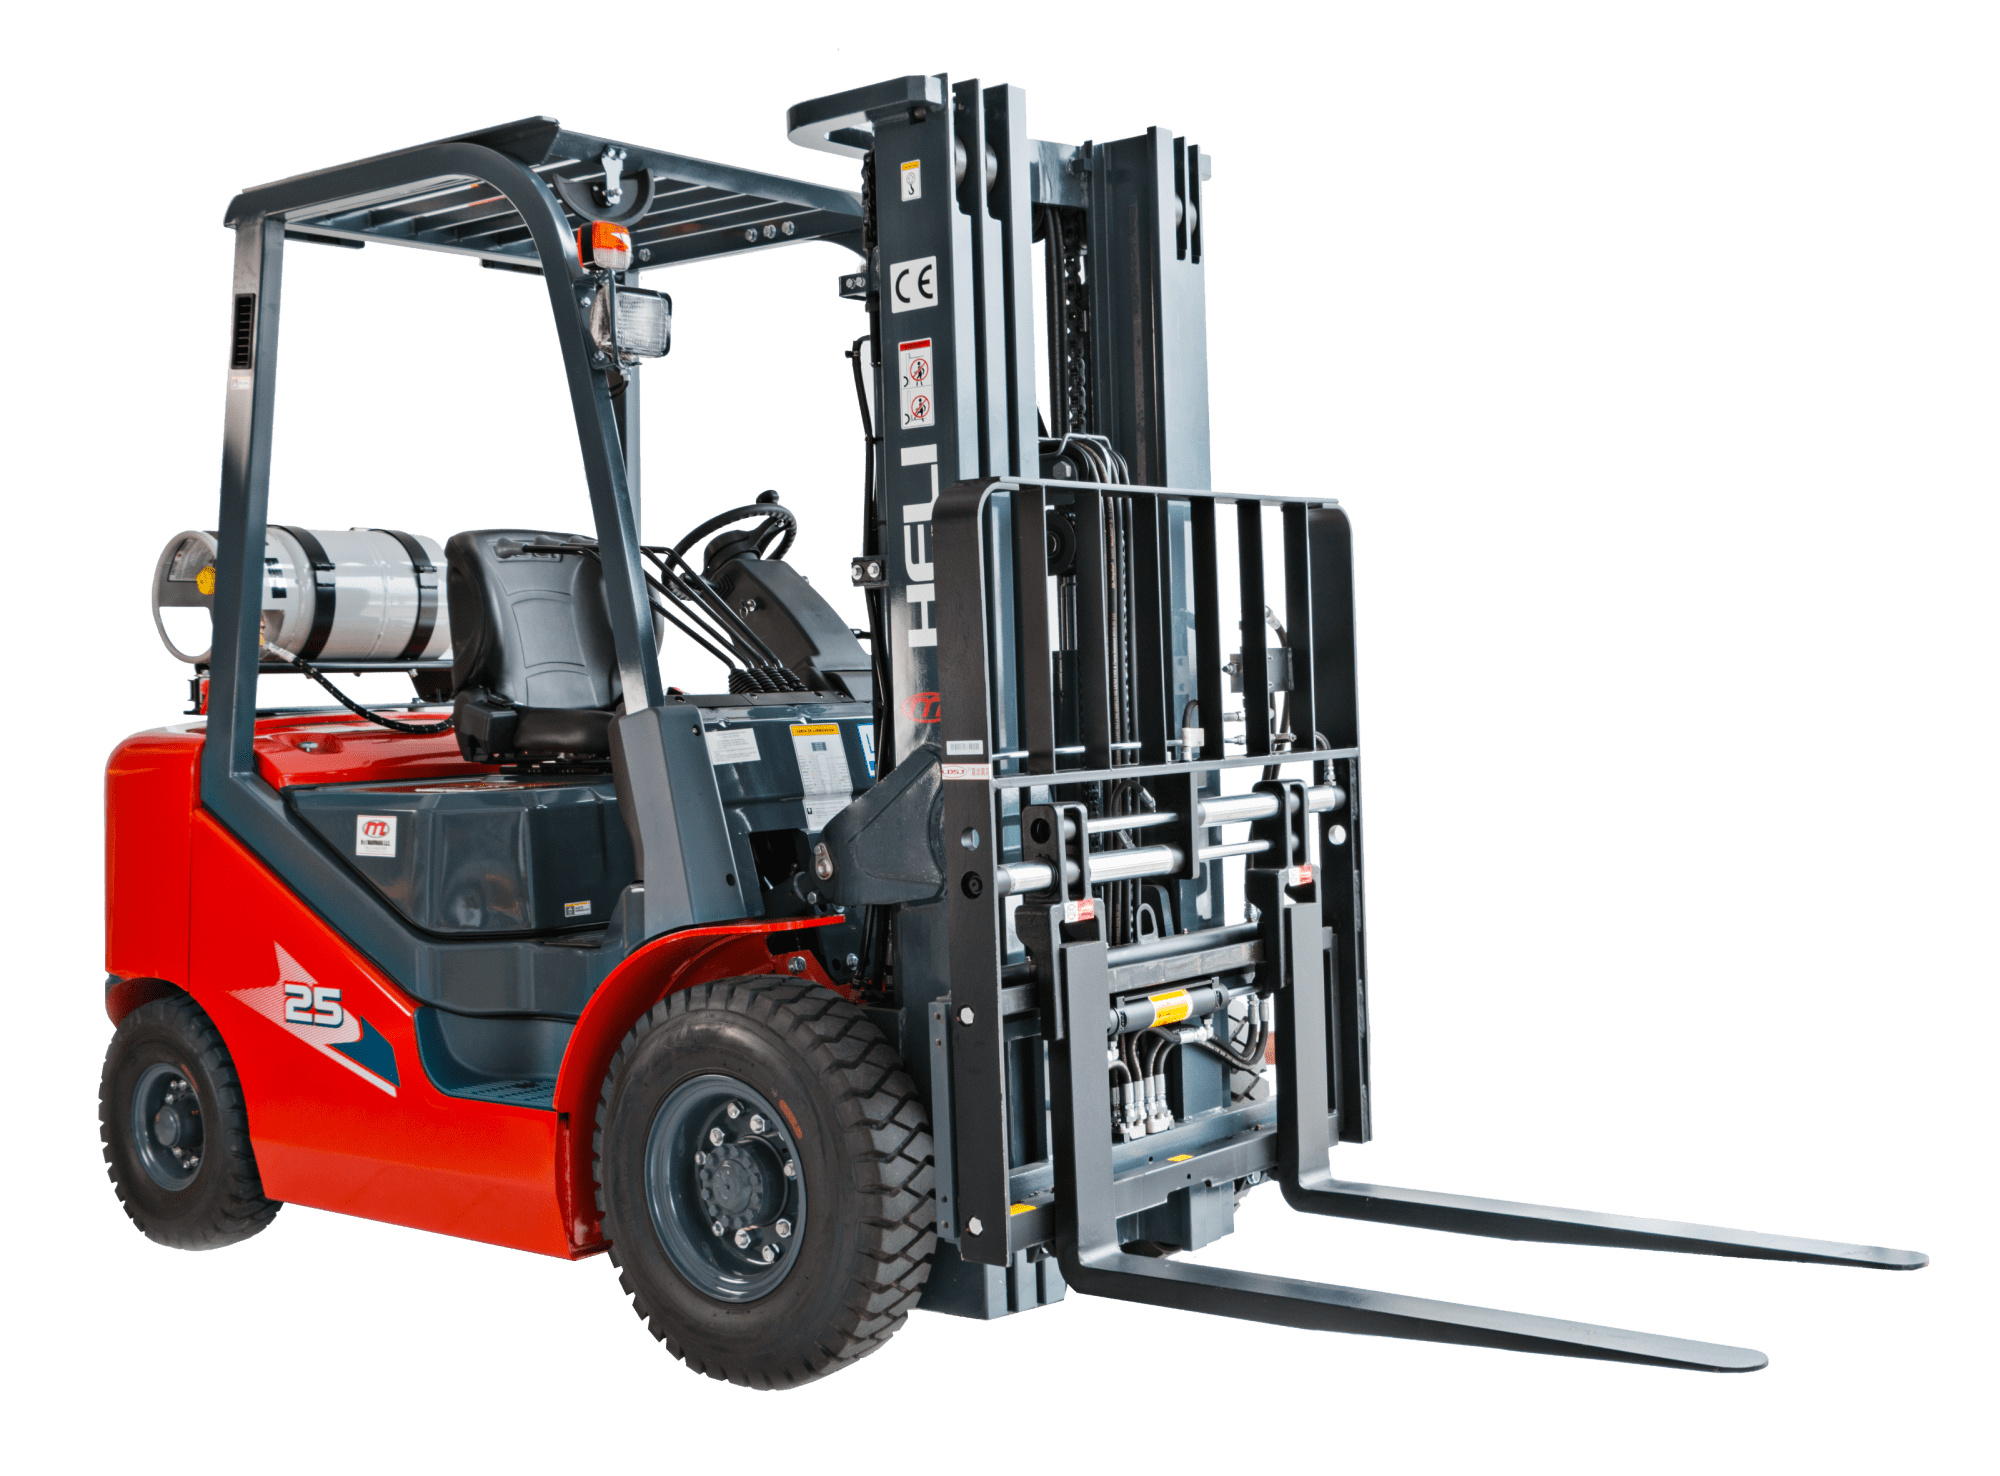 5 Advantages Of Getting Maintenance Done By A Forklift Company